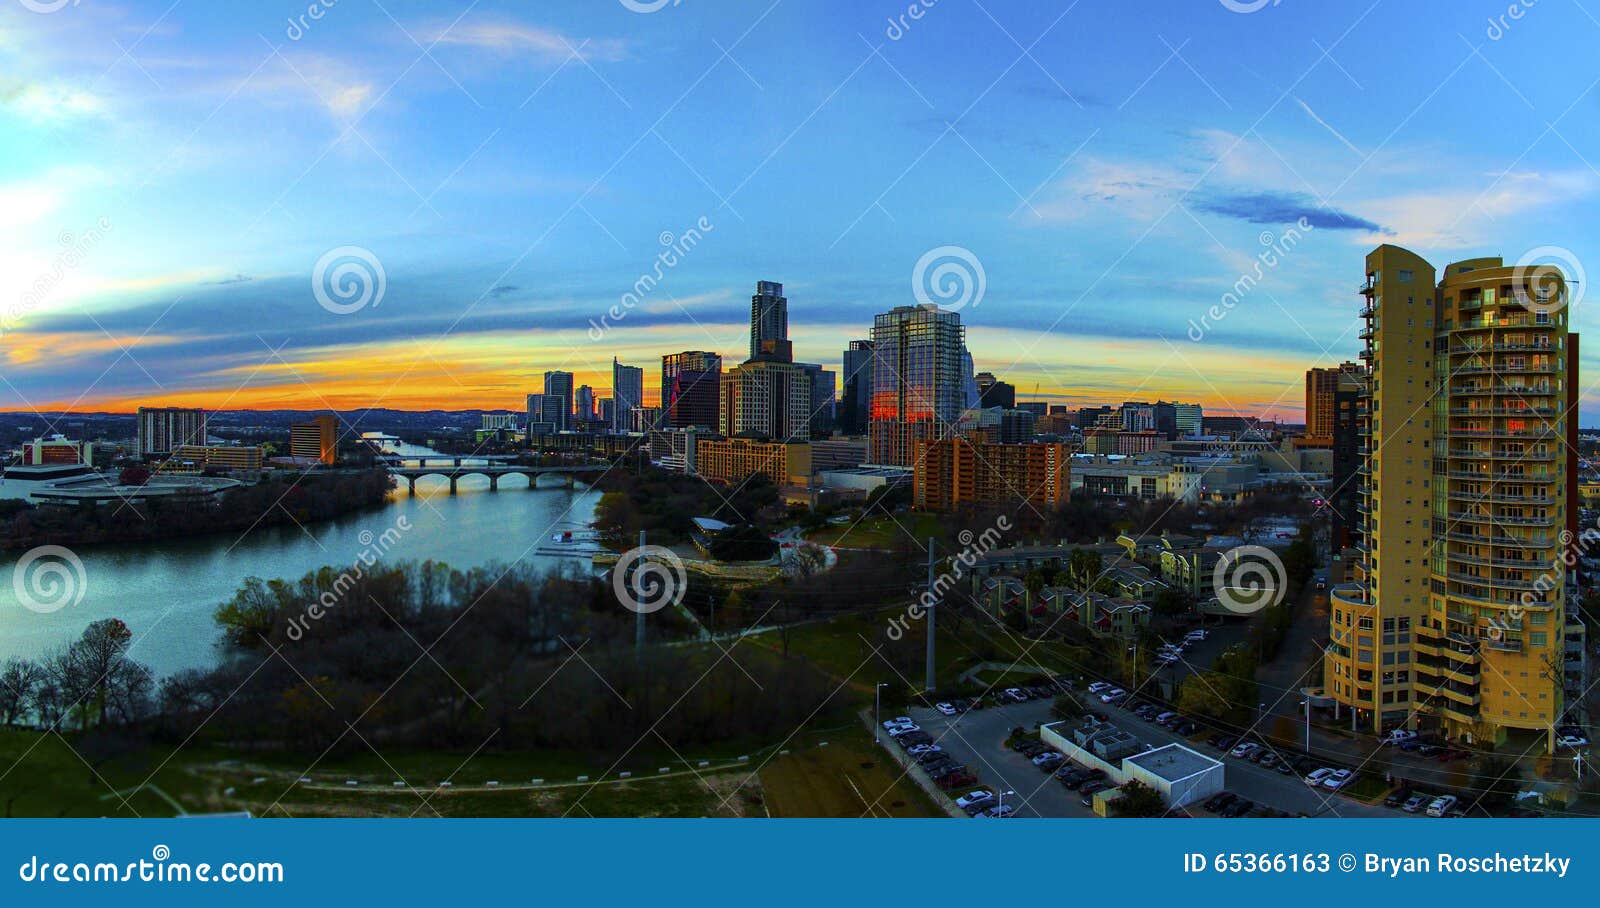 aerial skyline sunset tall condo foreground austin texas capital cities glowing busy at night